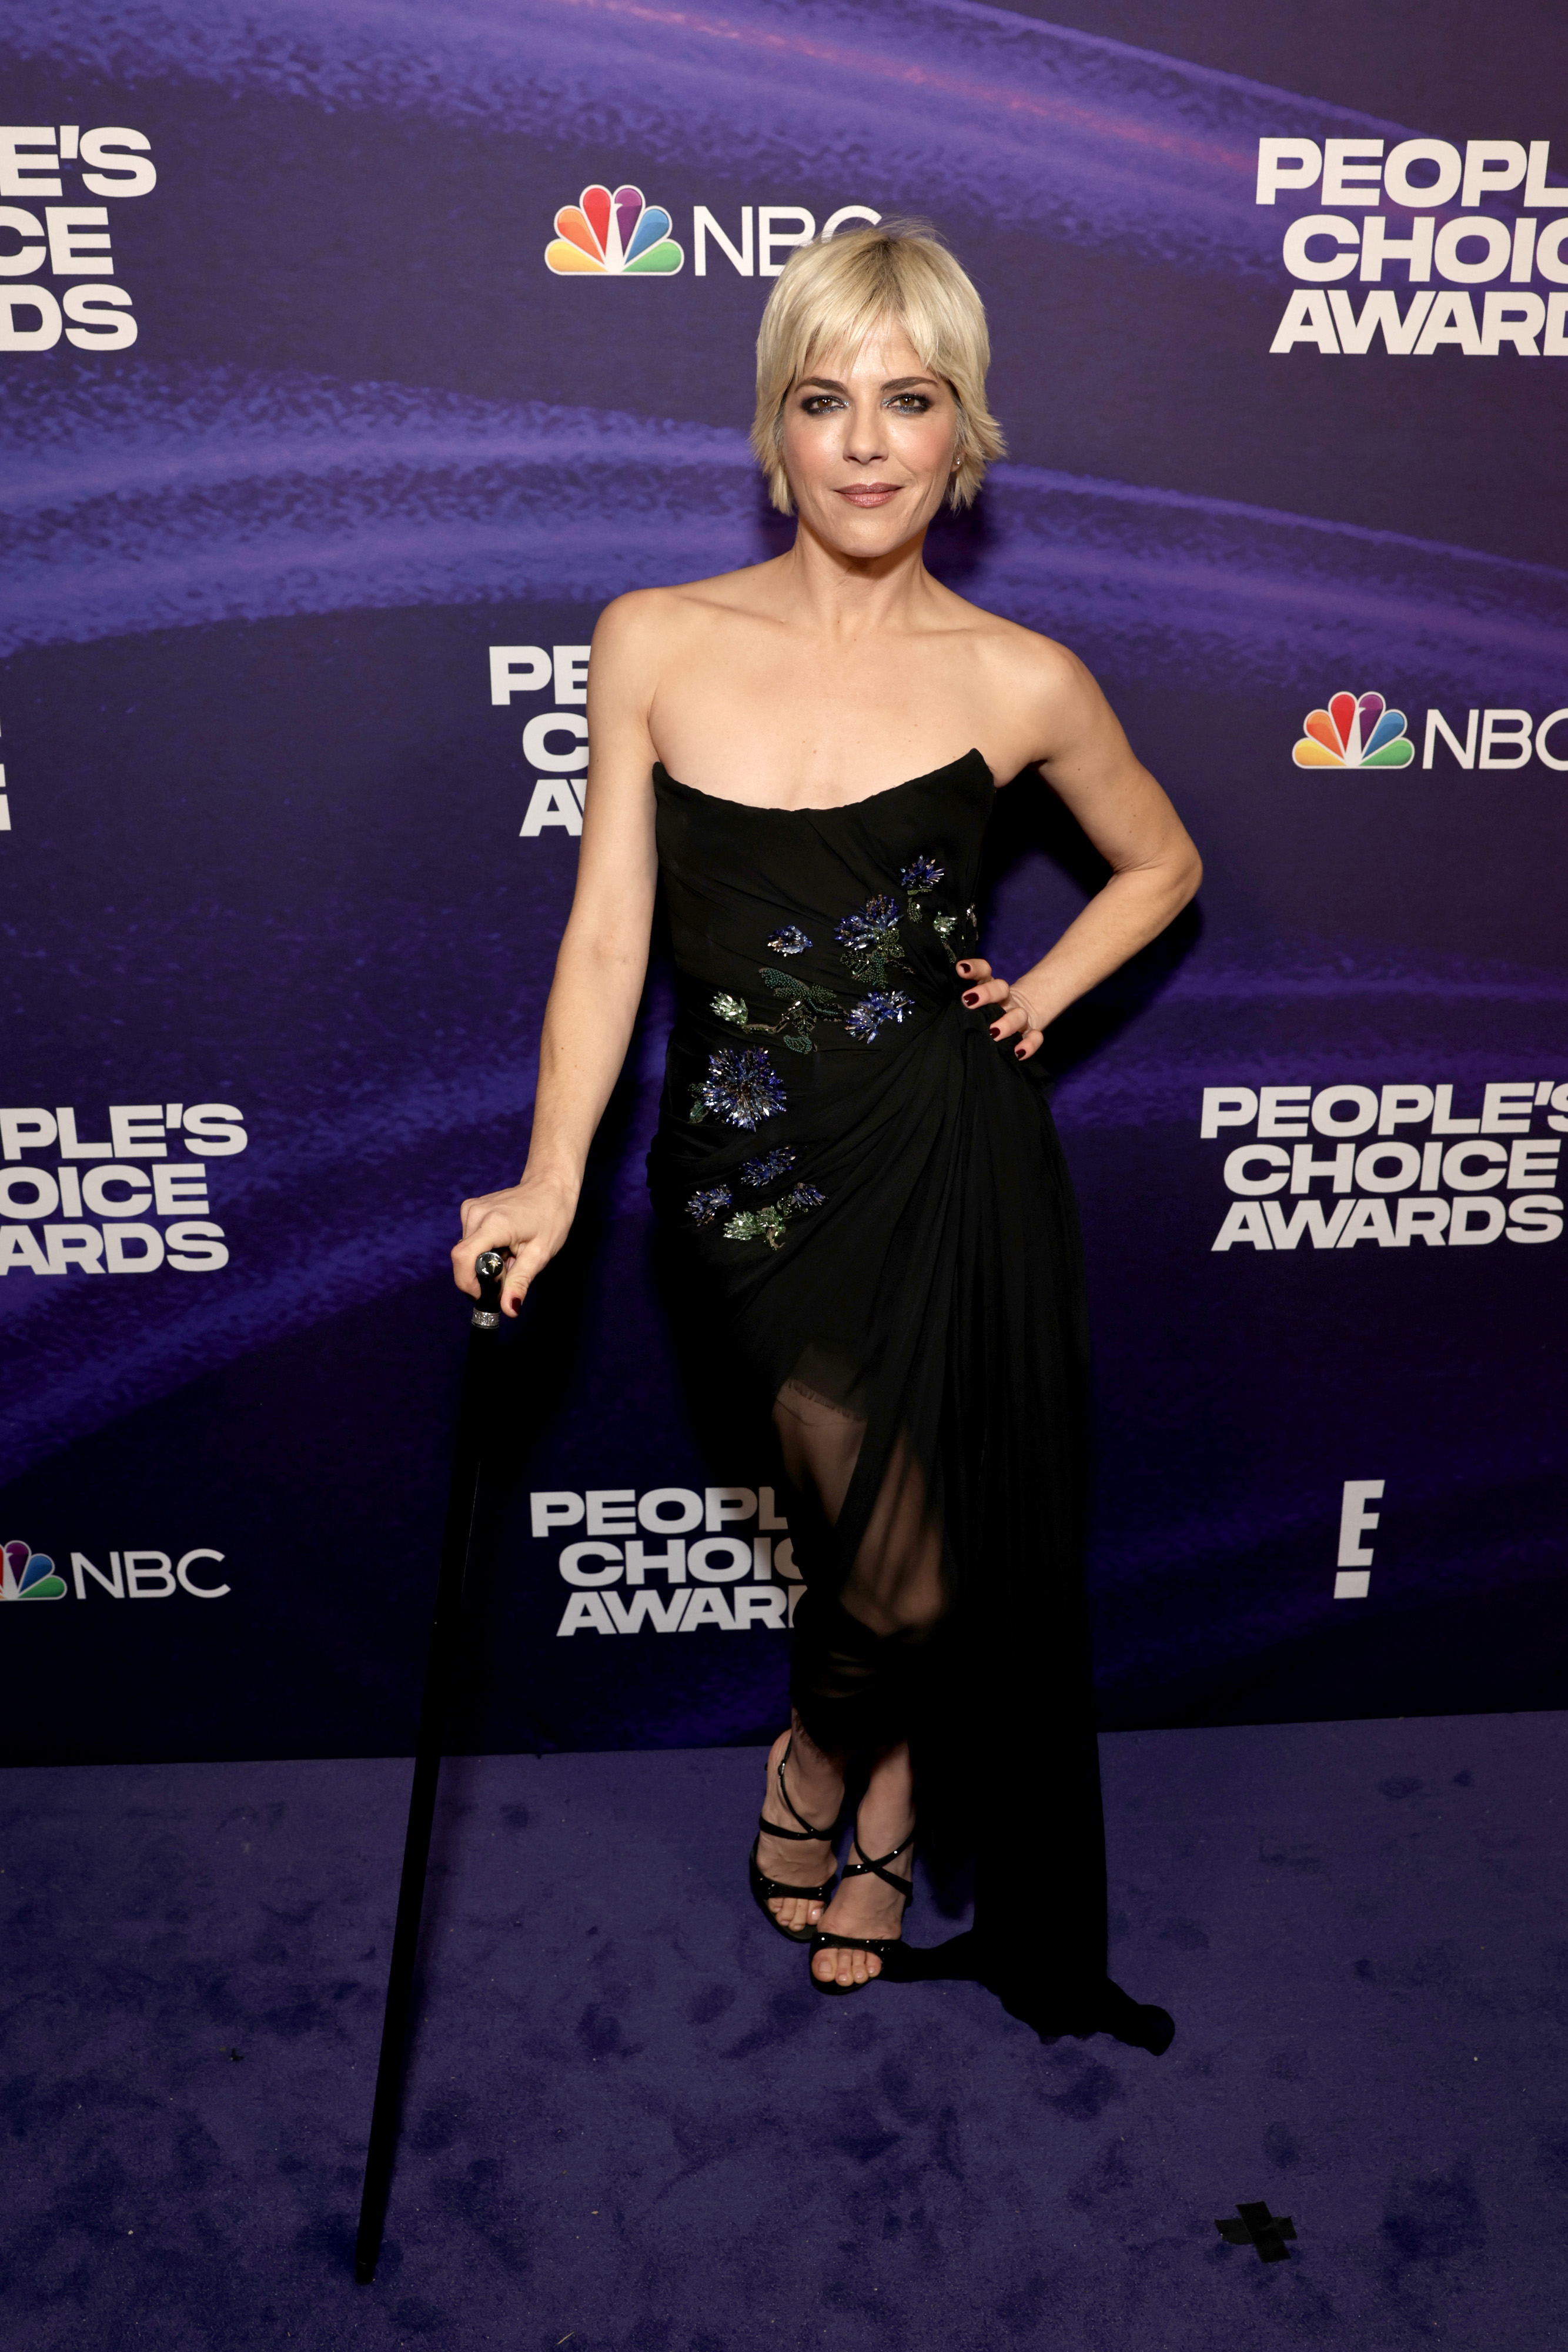 Selma Blair, recipient of The Competition Contestant of 2022 award for "Dancing with the Stars," strikes a pose backstage at the 2022 People's Choice Awards on December 6, 2022, in Santa Monica, California | Source: Getty Images